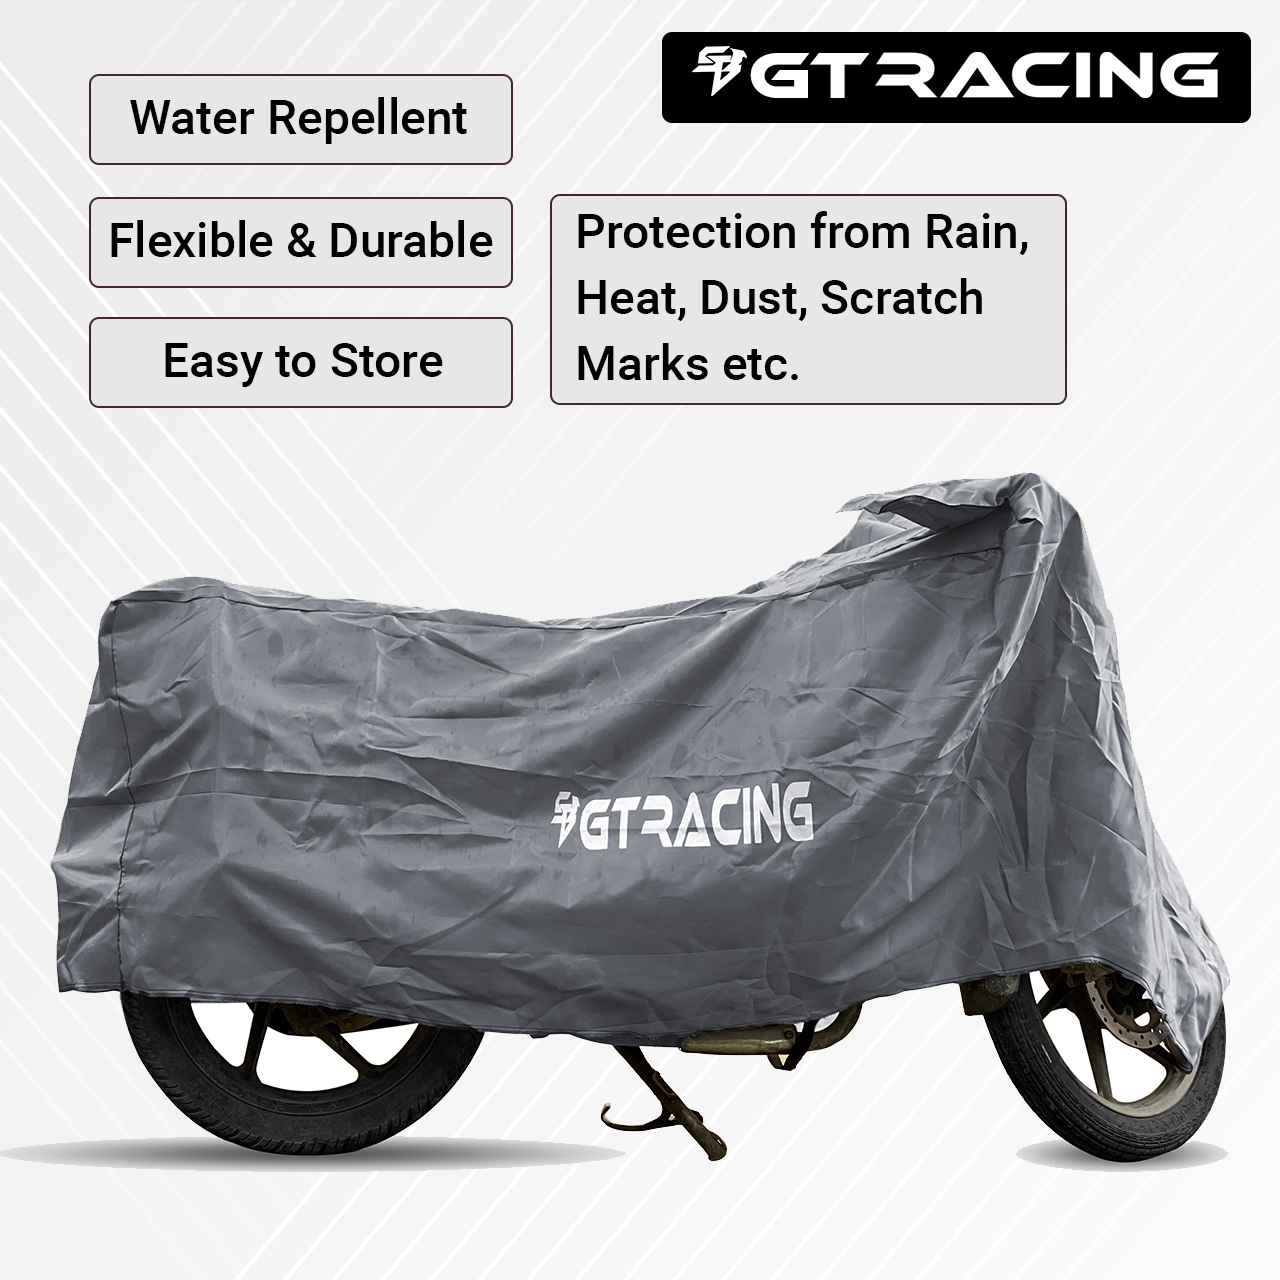 Steelbird Bike Cover GT Racing UV Protection Water-Resistant & Dustproof (2X2 Grey), Bike Body Cover With Carry Bag (All Scooter Activa Electric Scooty Size)